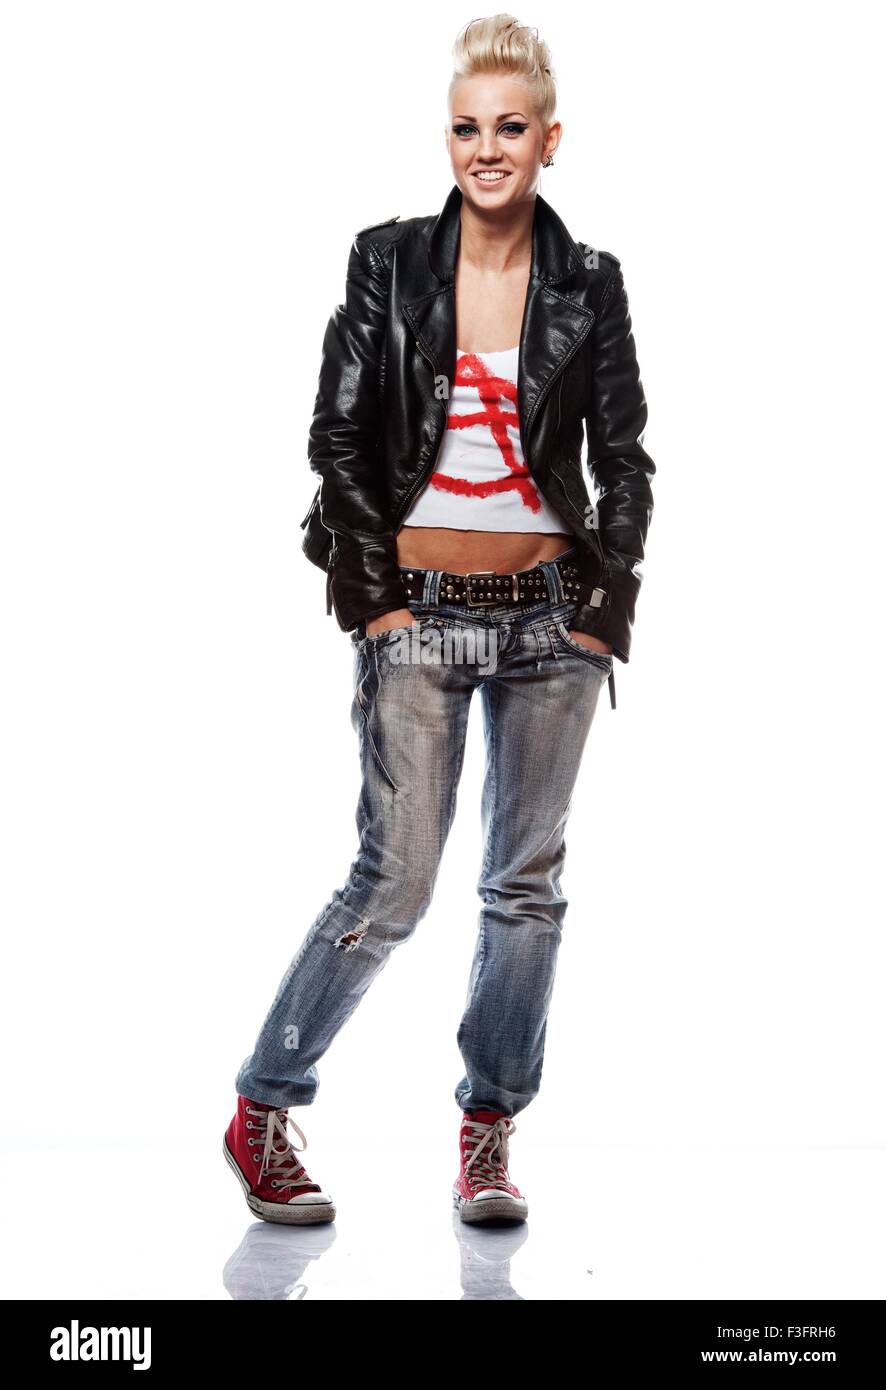 Punk girl in leather jacket smiling Stock Photo